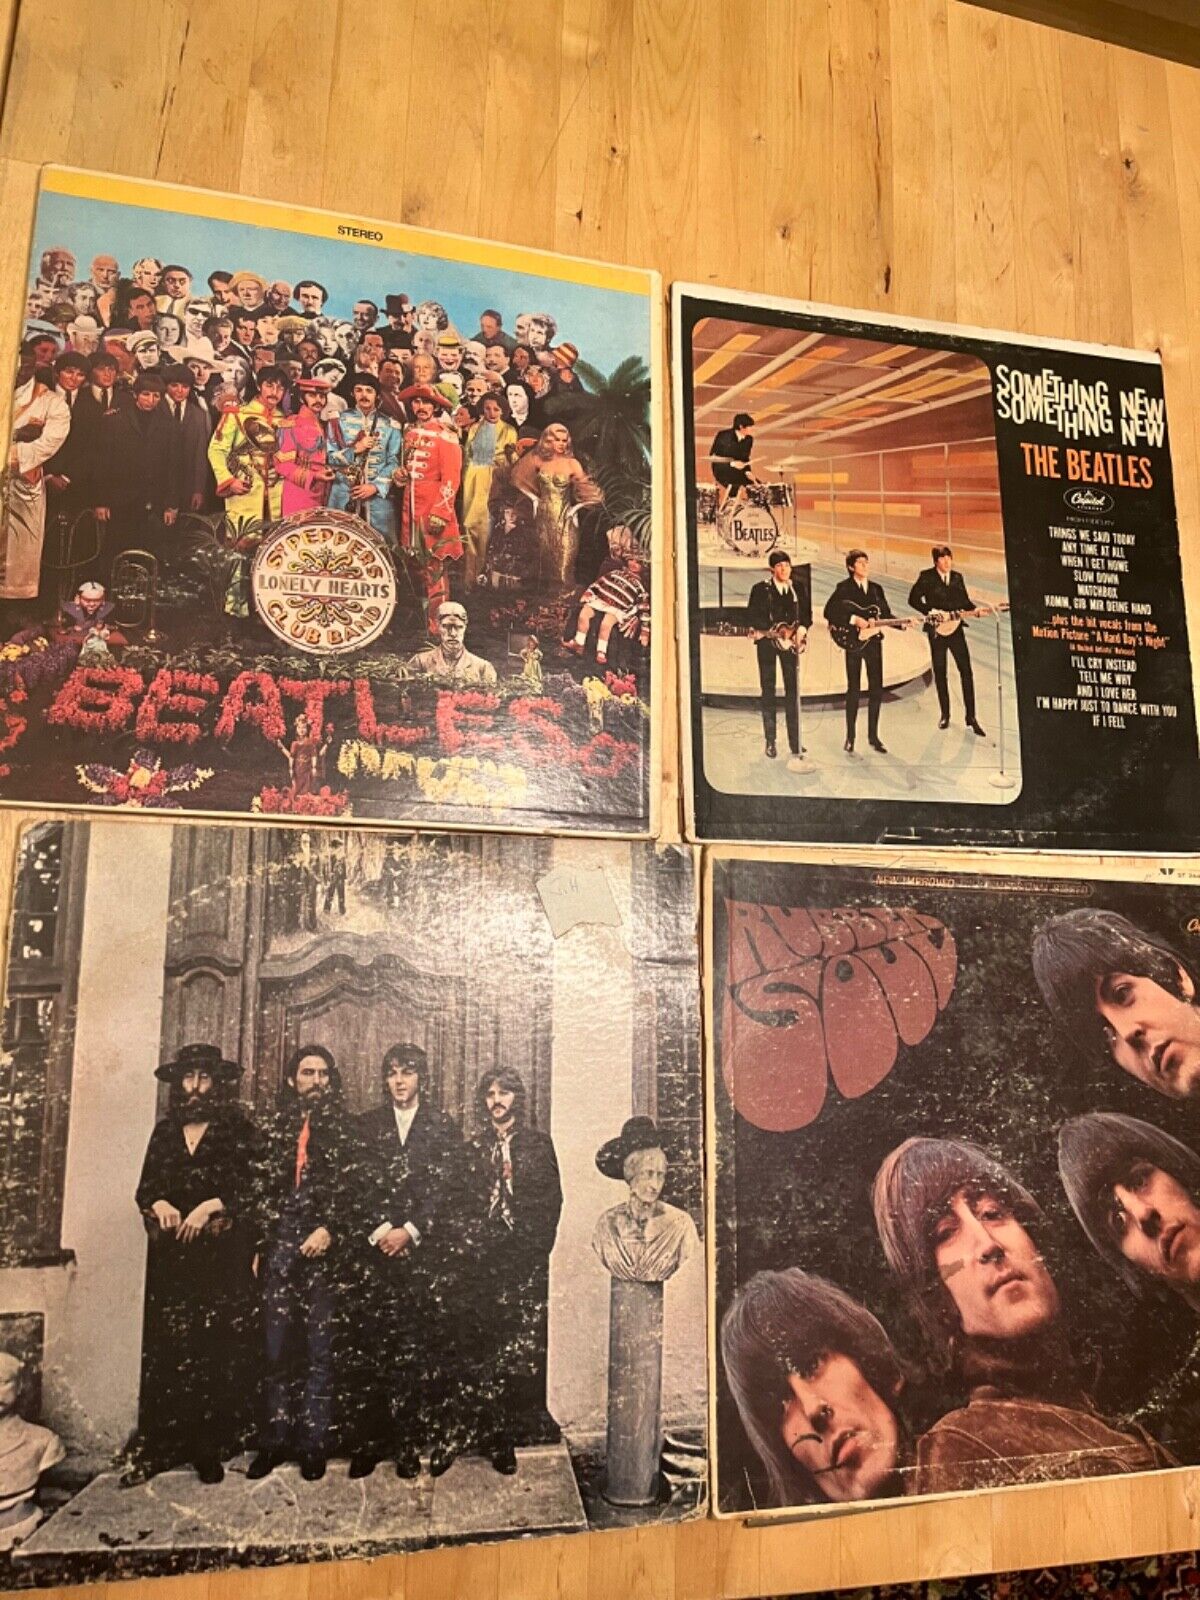 5 records (4 Beatles and a Byrd )-The Beatles Stereo Vinyl Records Lot of 4